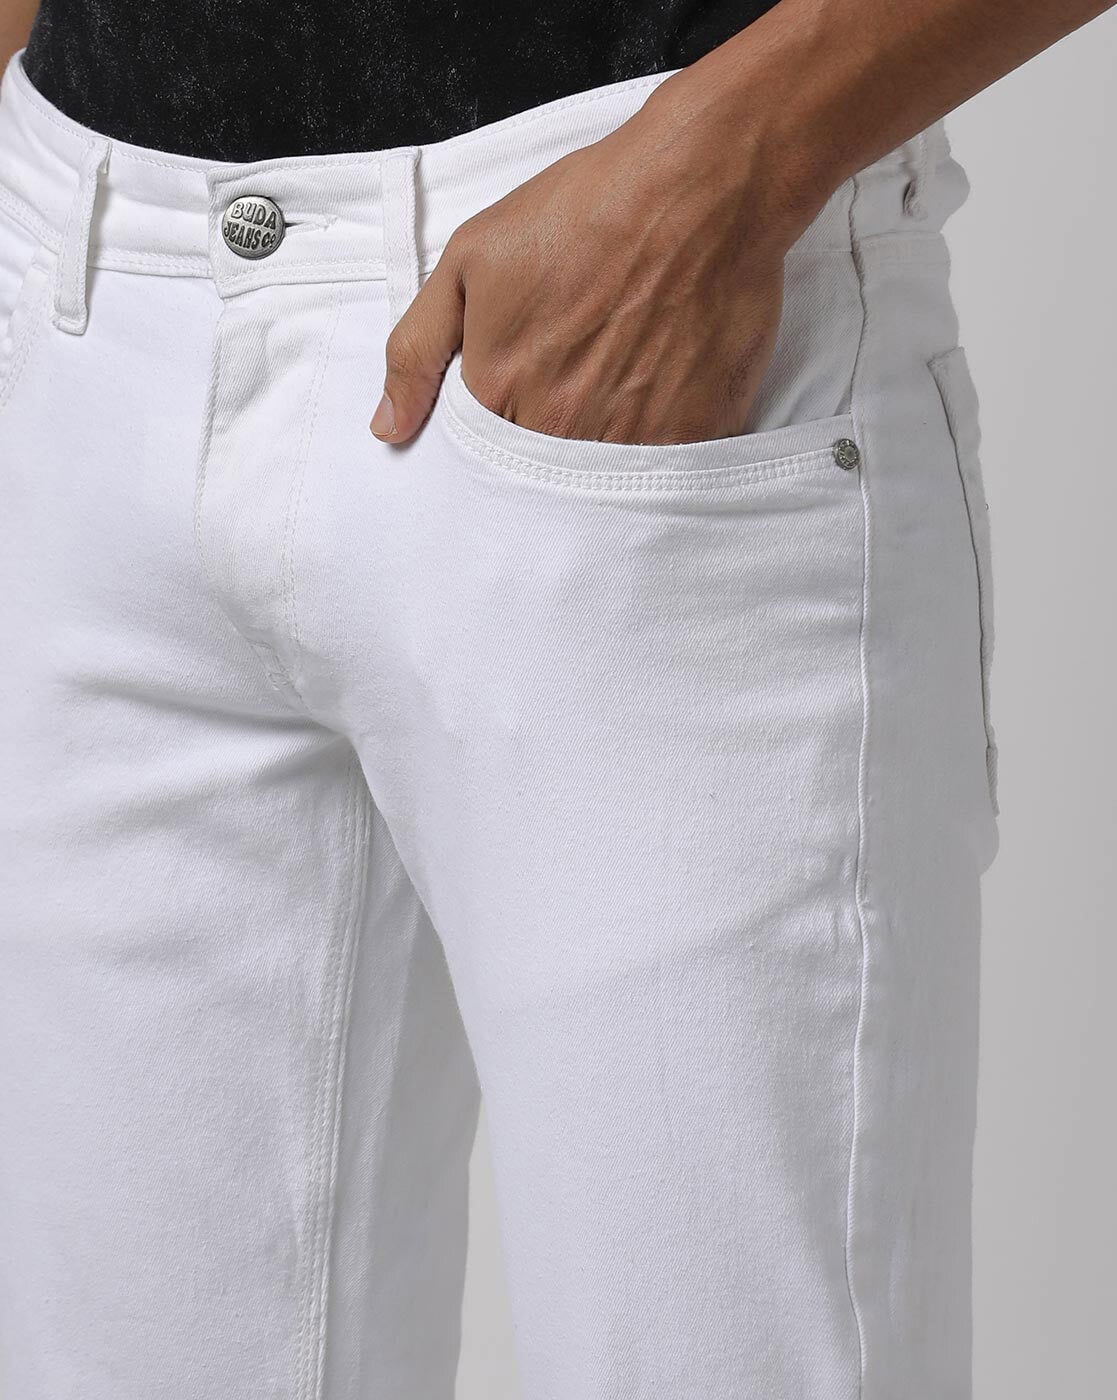 How To Keep Your White Denim Clean And Crisp | Stitch Fix Style